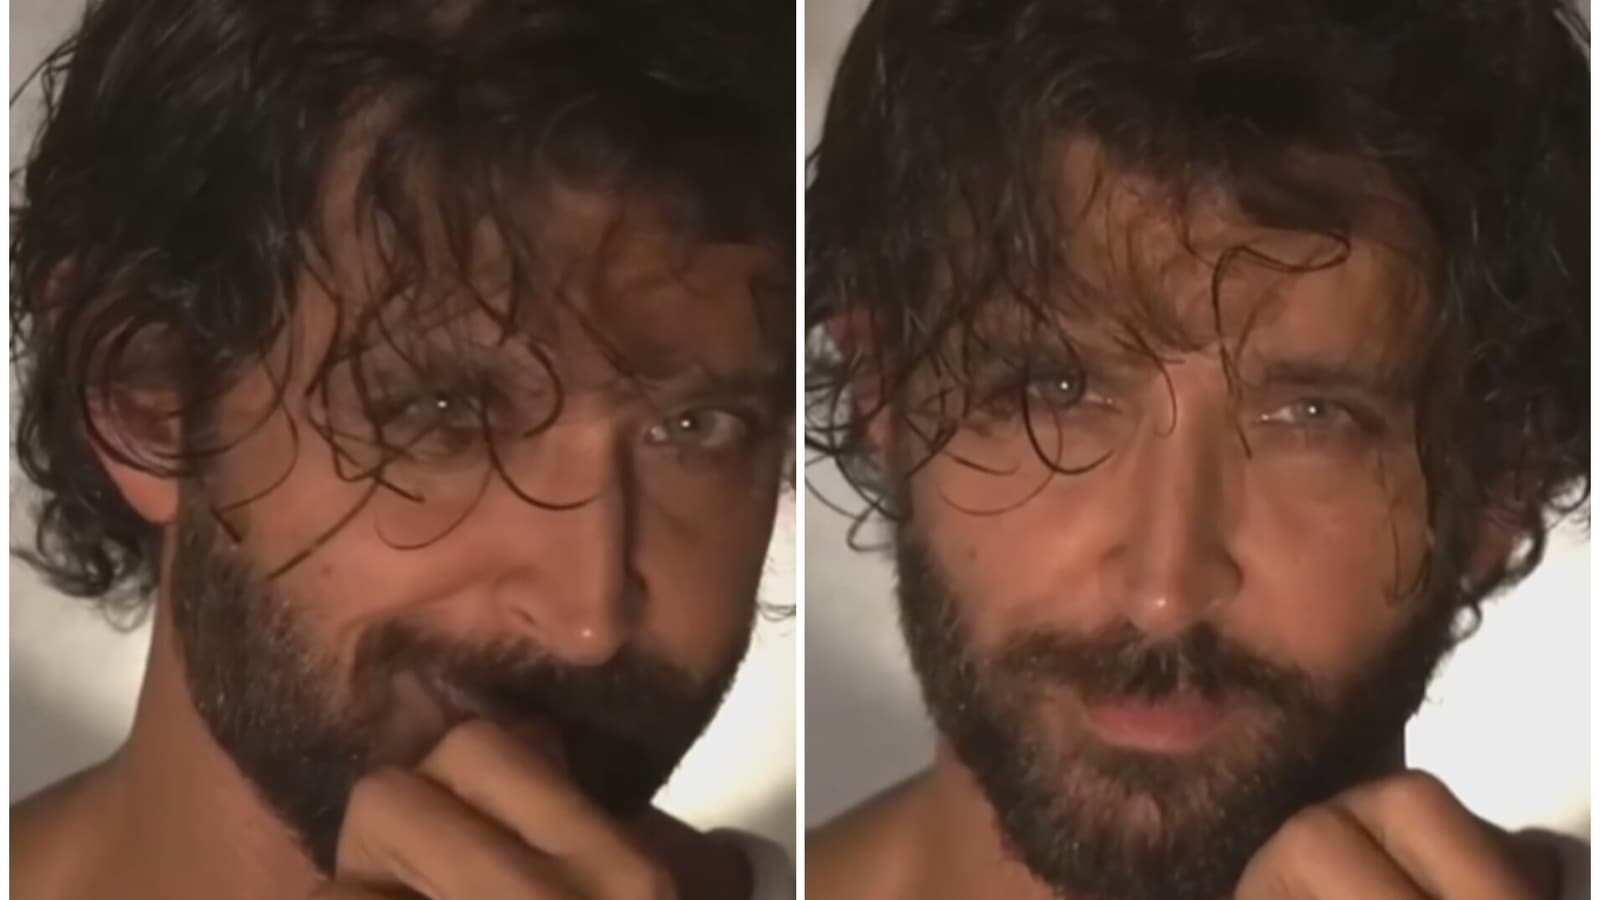 Hrithik Roshan S Tousled Hair And Smoldering Gaze In New Video Make Fans Say ‘killing Us With